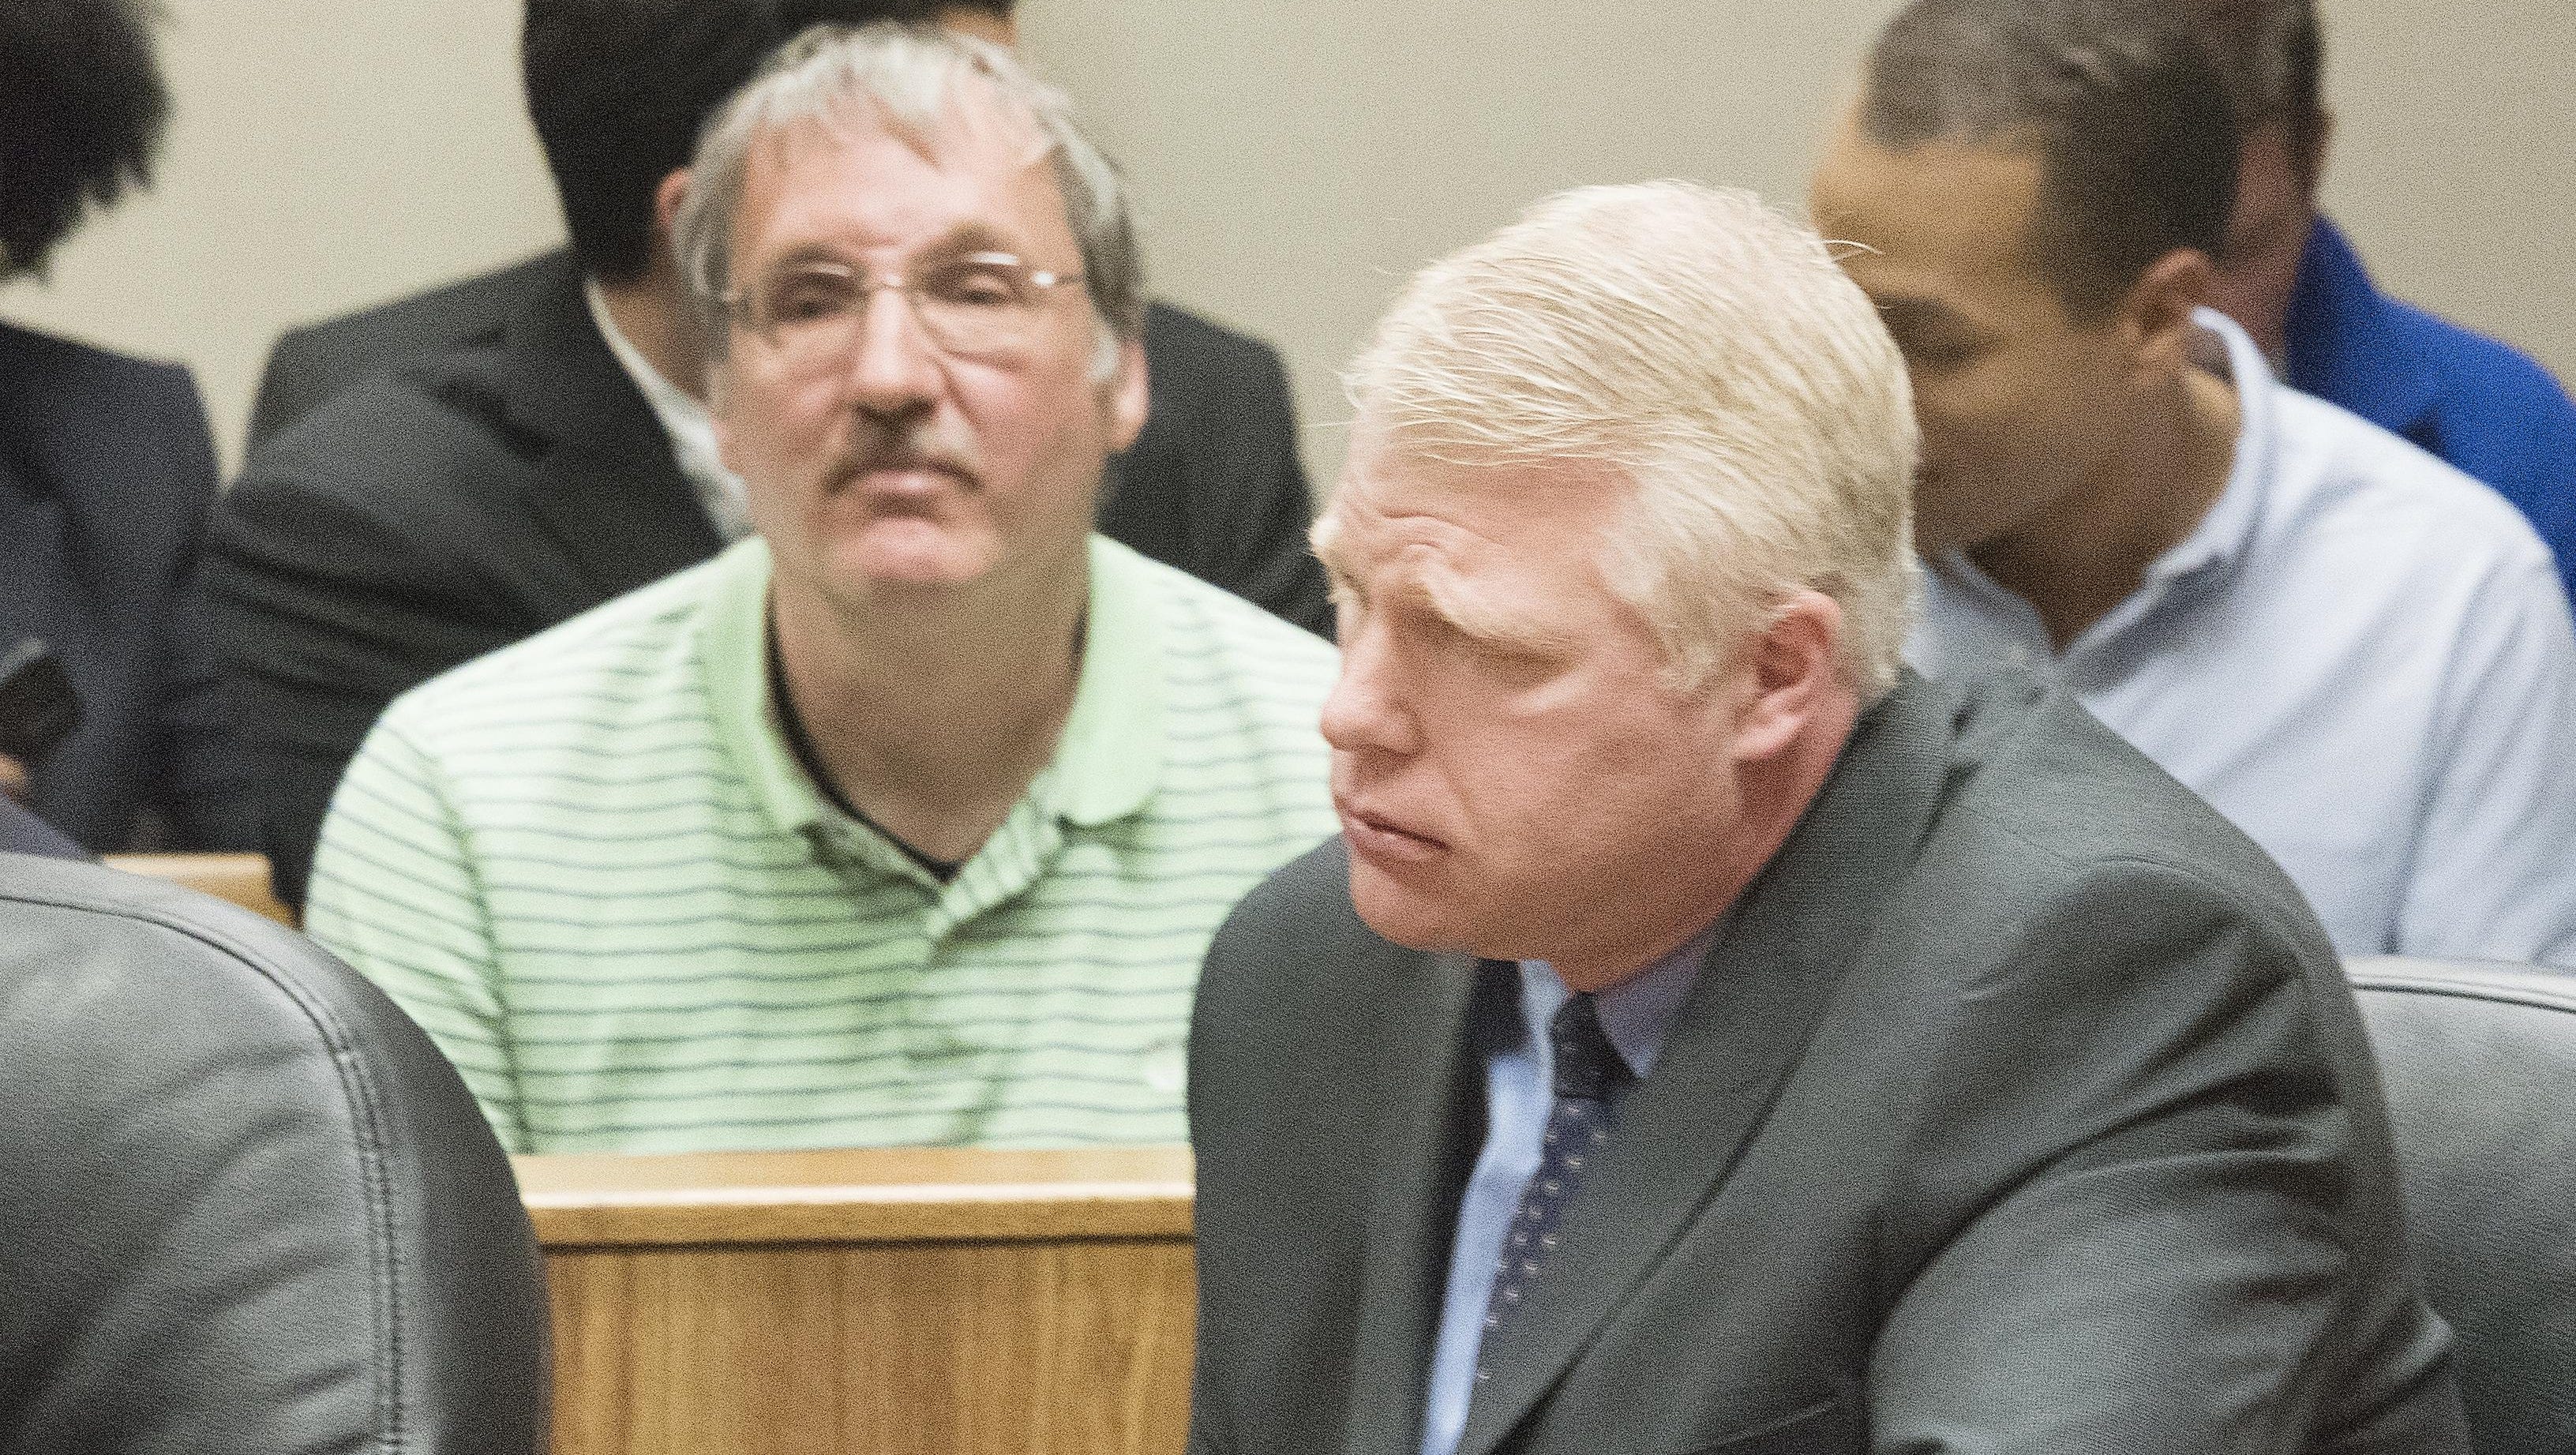 Michael Prysby, Michigan Department of Environmental Quality District 8 Water Engineer, left, and Stephen Busch, Michigan DEQ District 8 Water Supervisor appear in court in this April 20, 2016 file photo. Prysby, Busch and two other state bureaucrats who were among the first charged in the Flint water investigation will get their day in court Monday after at least 18 months of waiting.